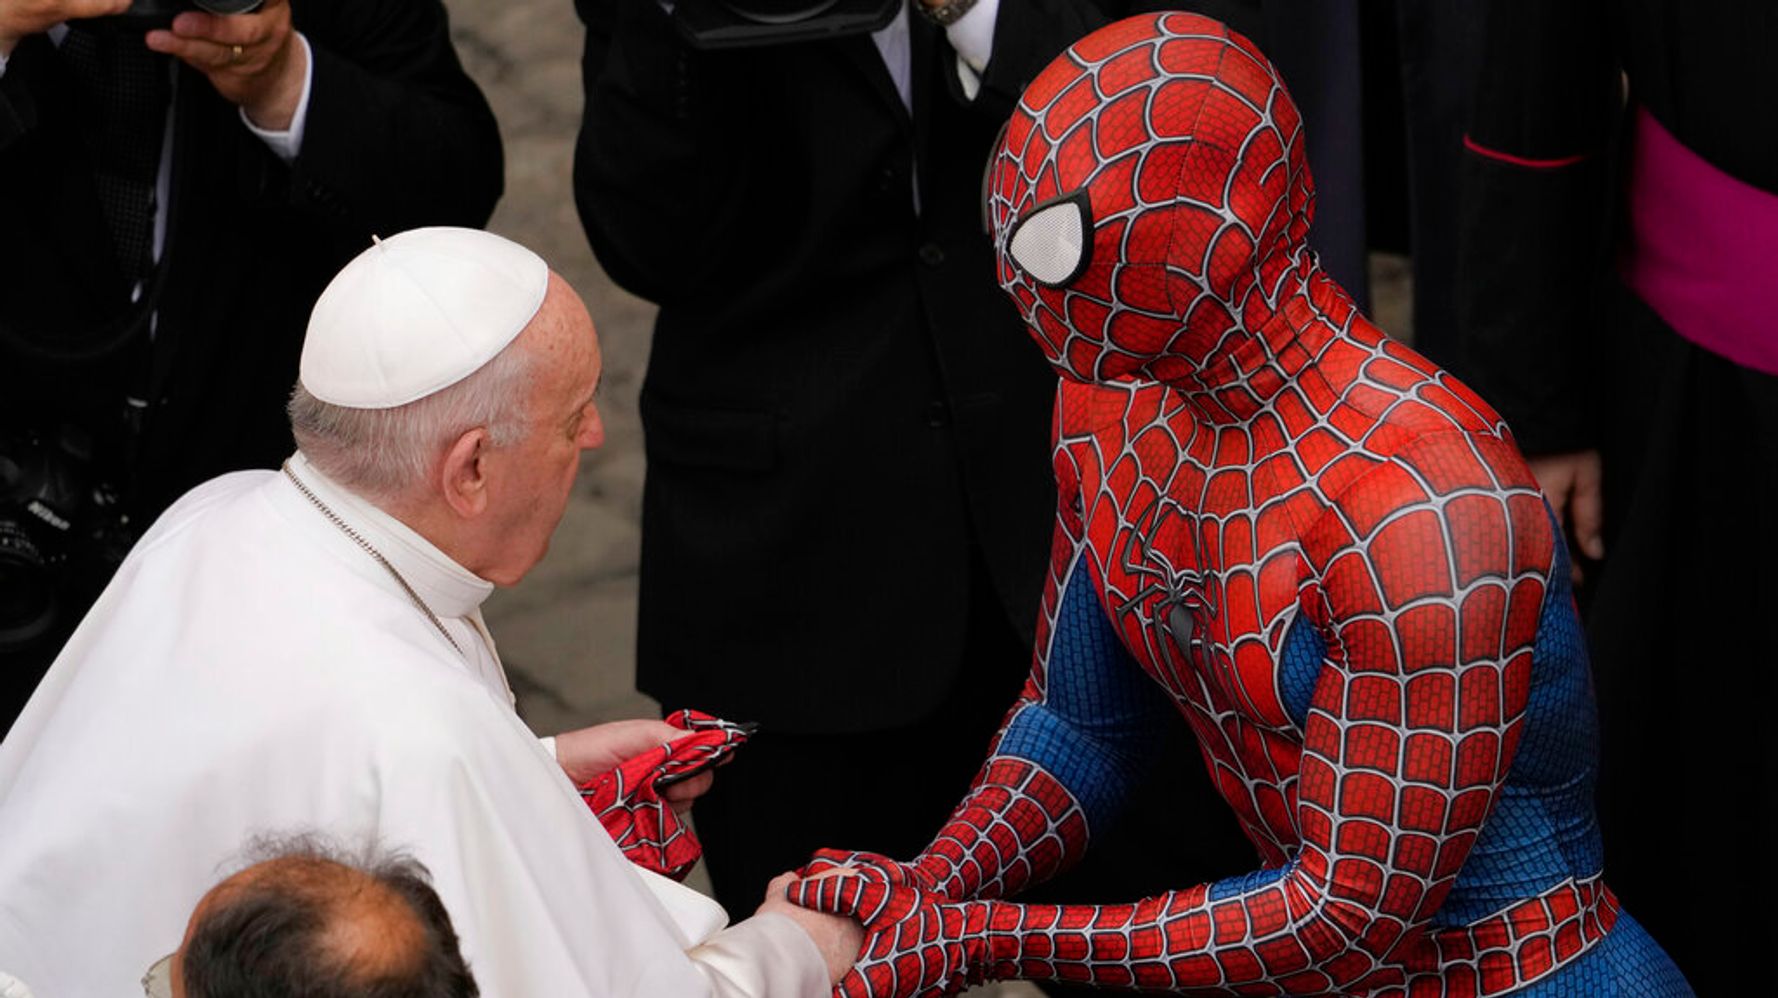 Pope Francis Meets 'Super-hero' In Spider-Man Costume At Vatican